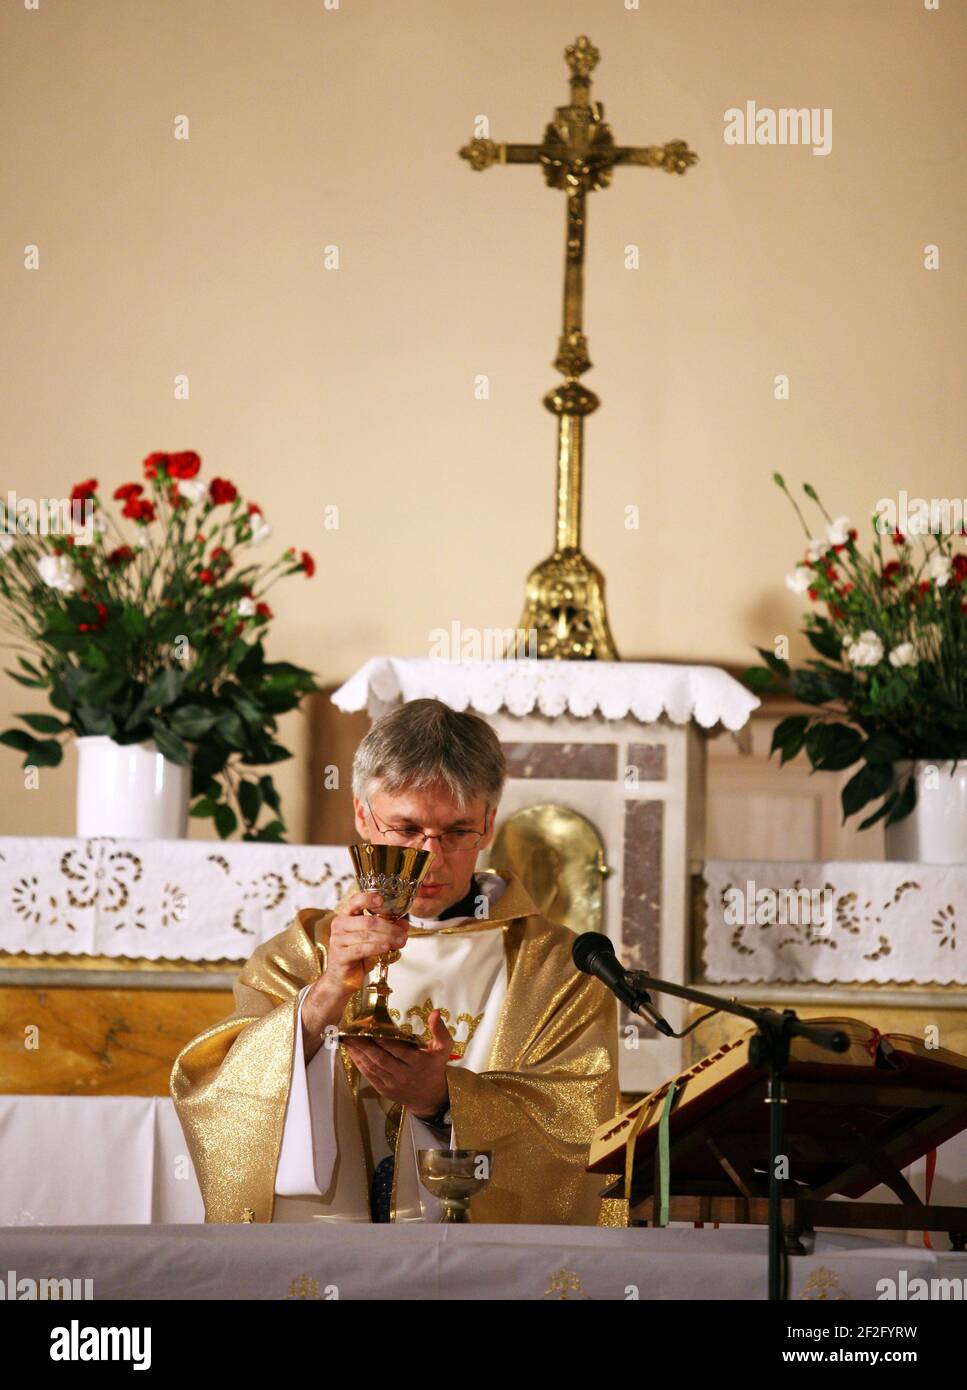 ISTANBUL, TURKEY - MAY 2: Priest, praying to God consecration the bread and wine in Czestochowa's Mother Mary Church on May 2, 2009 in Polenezkoy, Istanbul, Turkey. Stock Photo